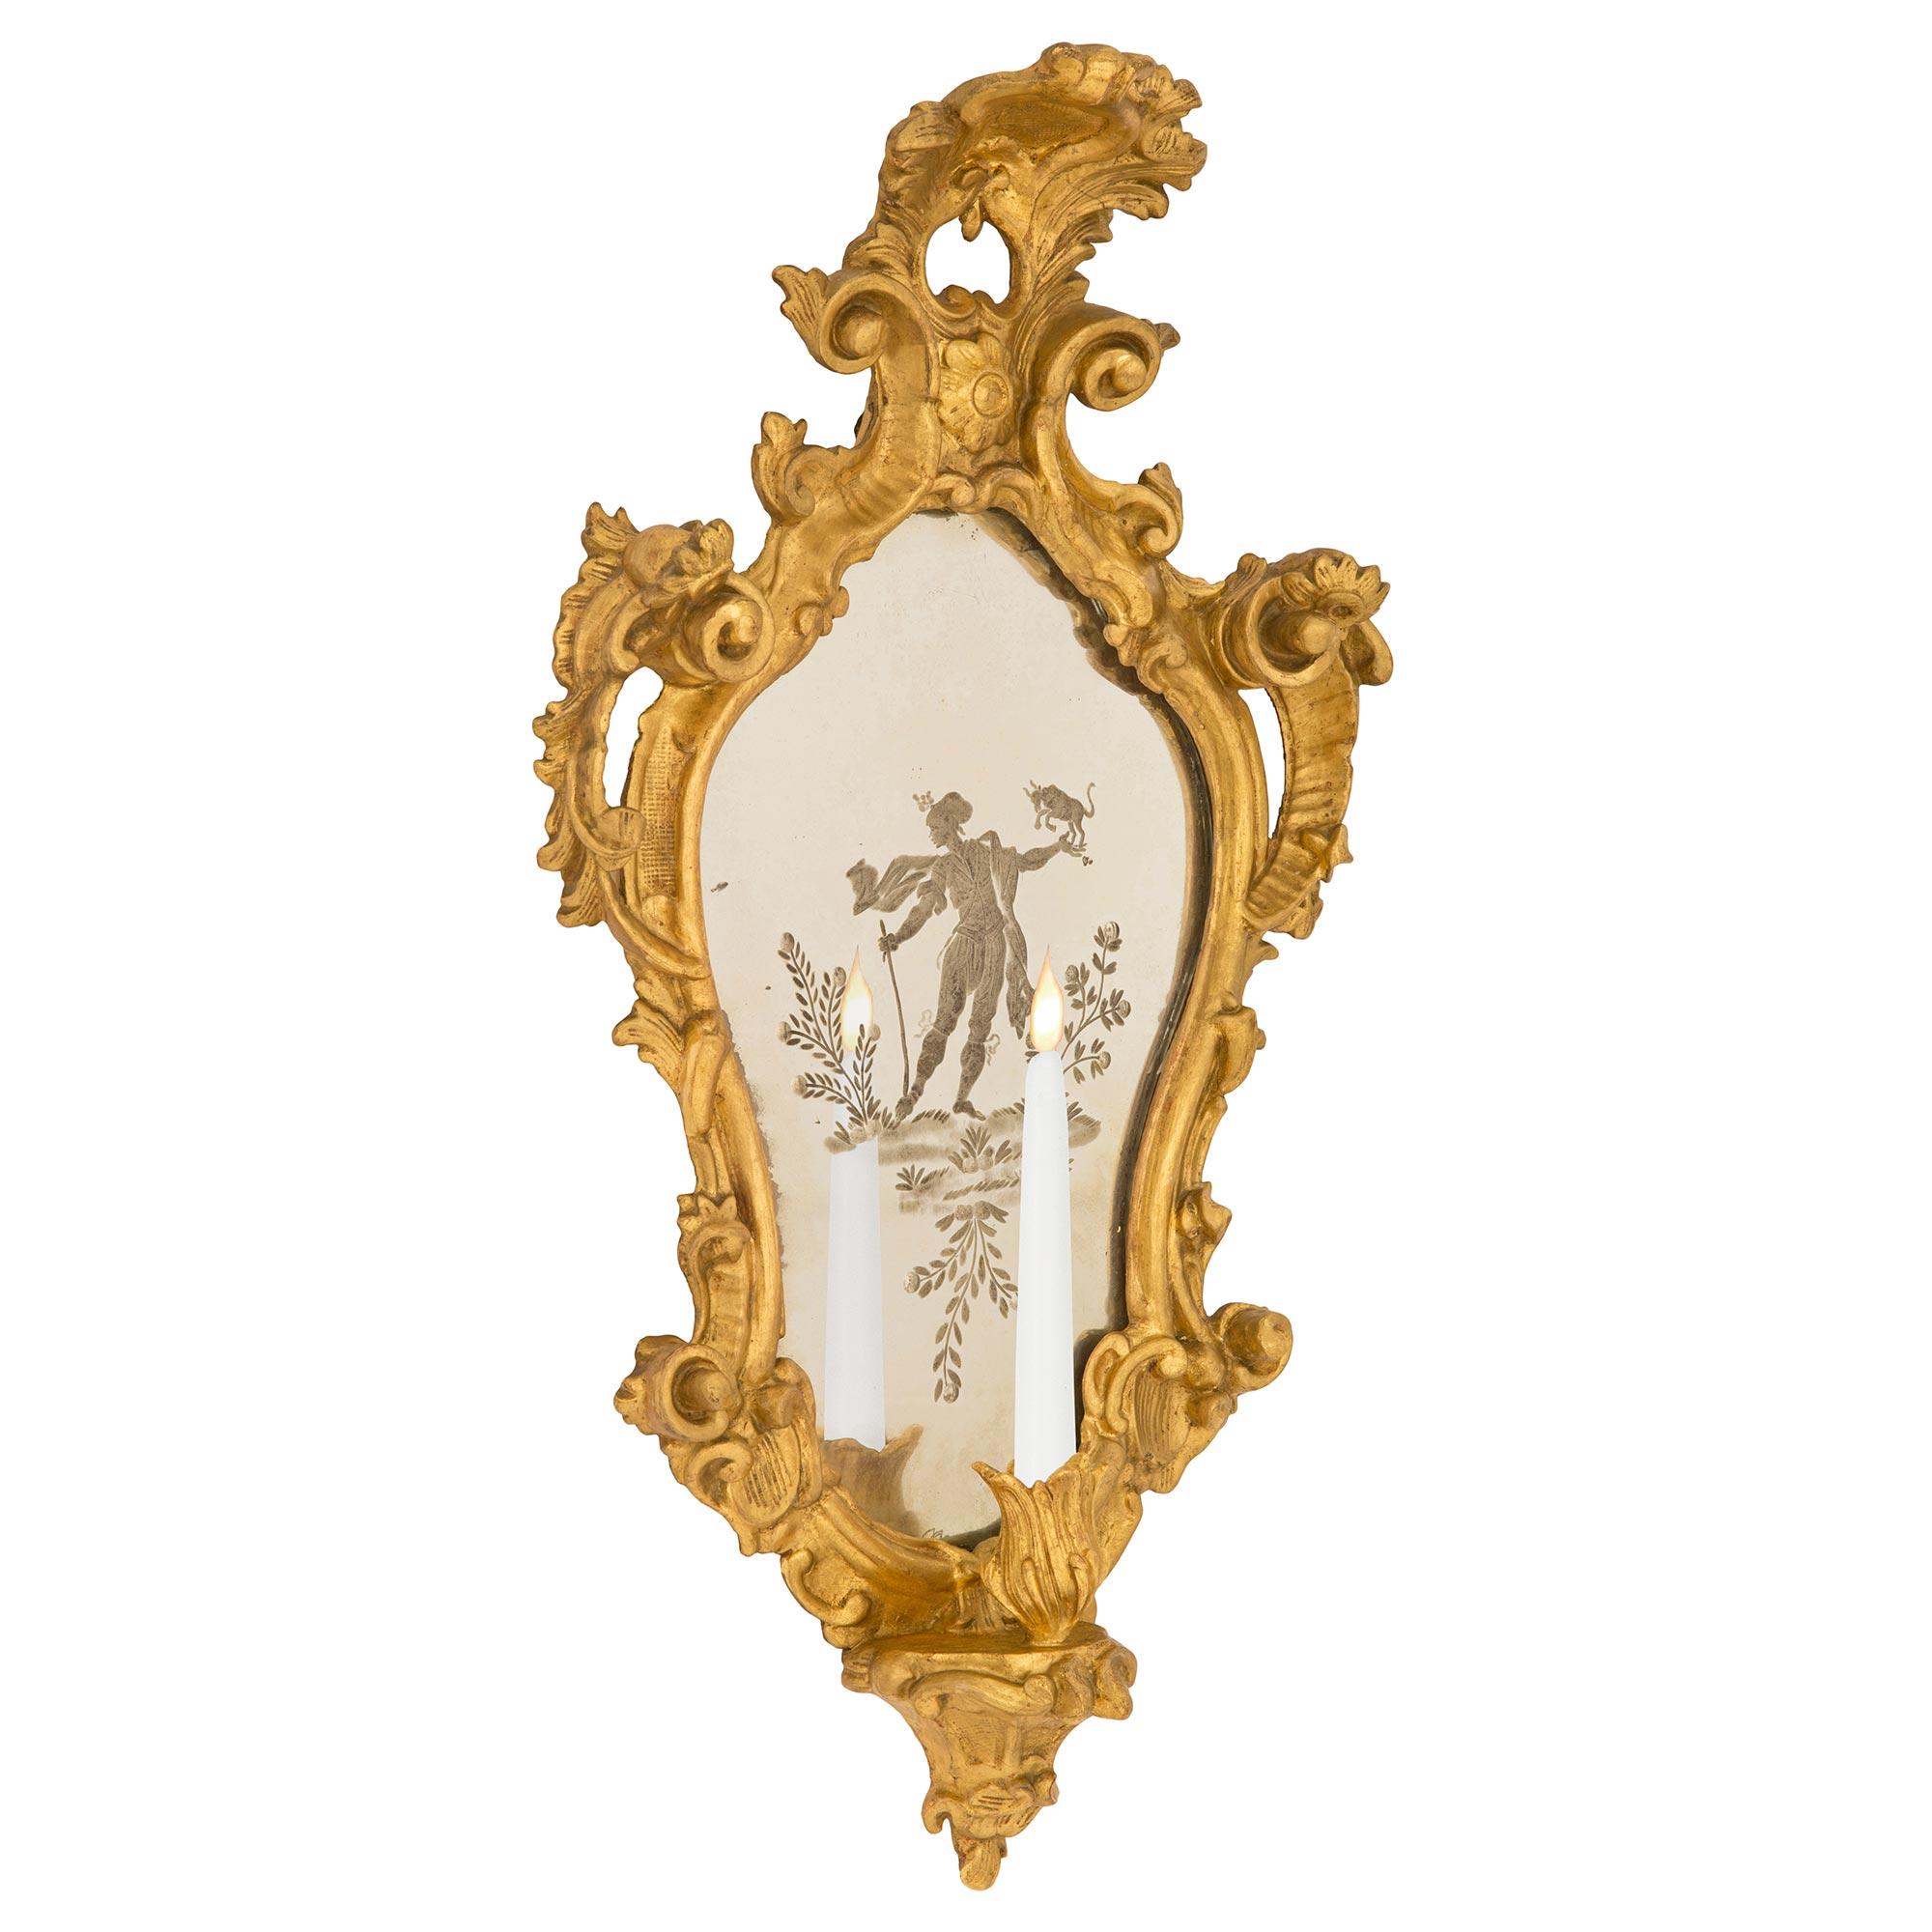 A wonderful true pair of Italian early 19th century Venetian st. giltwood and etched mirror sconces. Each beautiful single arm sconce displays a charming richly carved scrolled foliate arm at the base with striking wonderfully executed scrolled